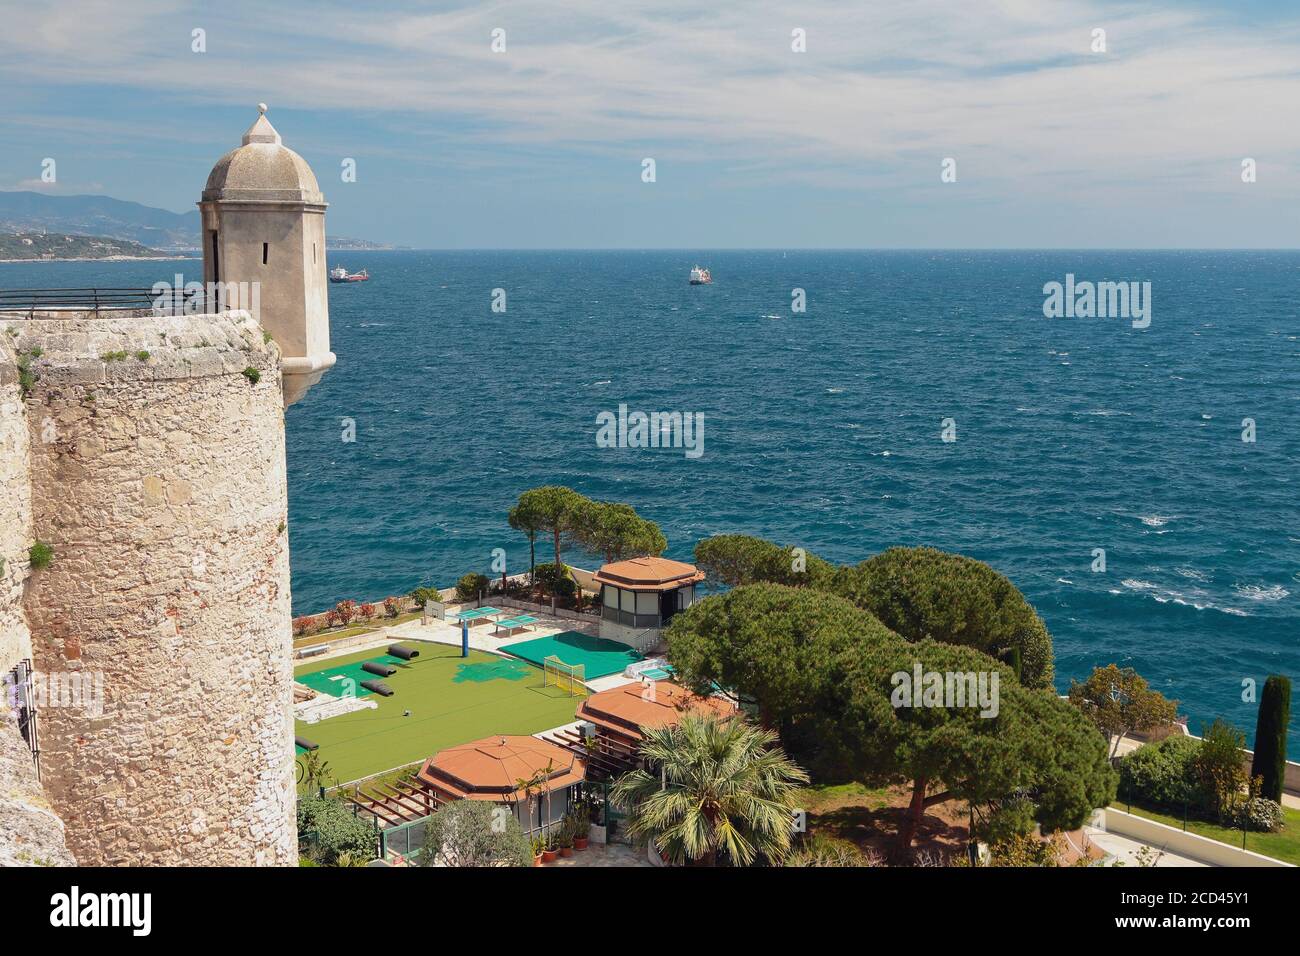 Watchtower of fortress, coast and sea. Monte Carlo, Monaco Stock Photo